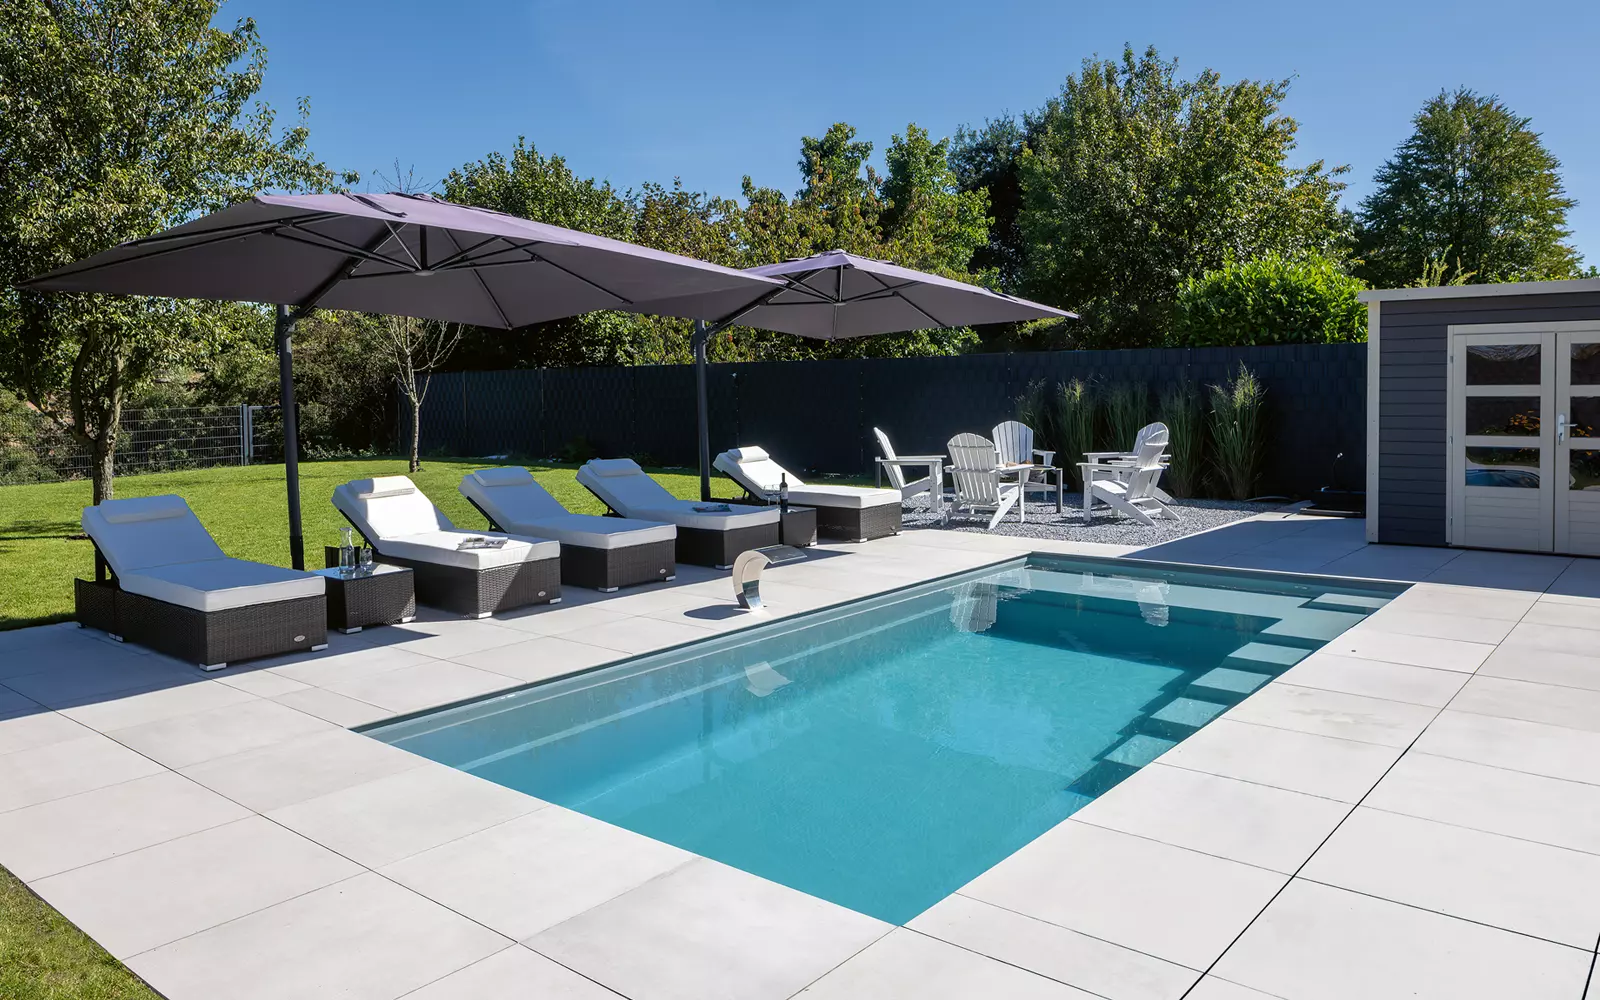 The Precision fibreglass pool. Streamlined and Stylish Design. High Waterline. 